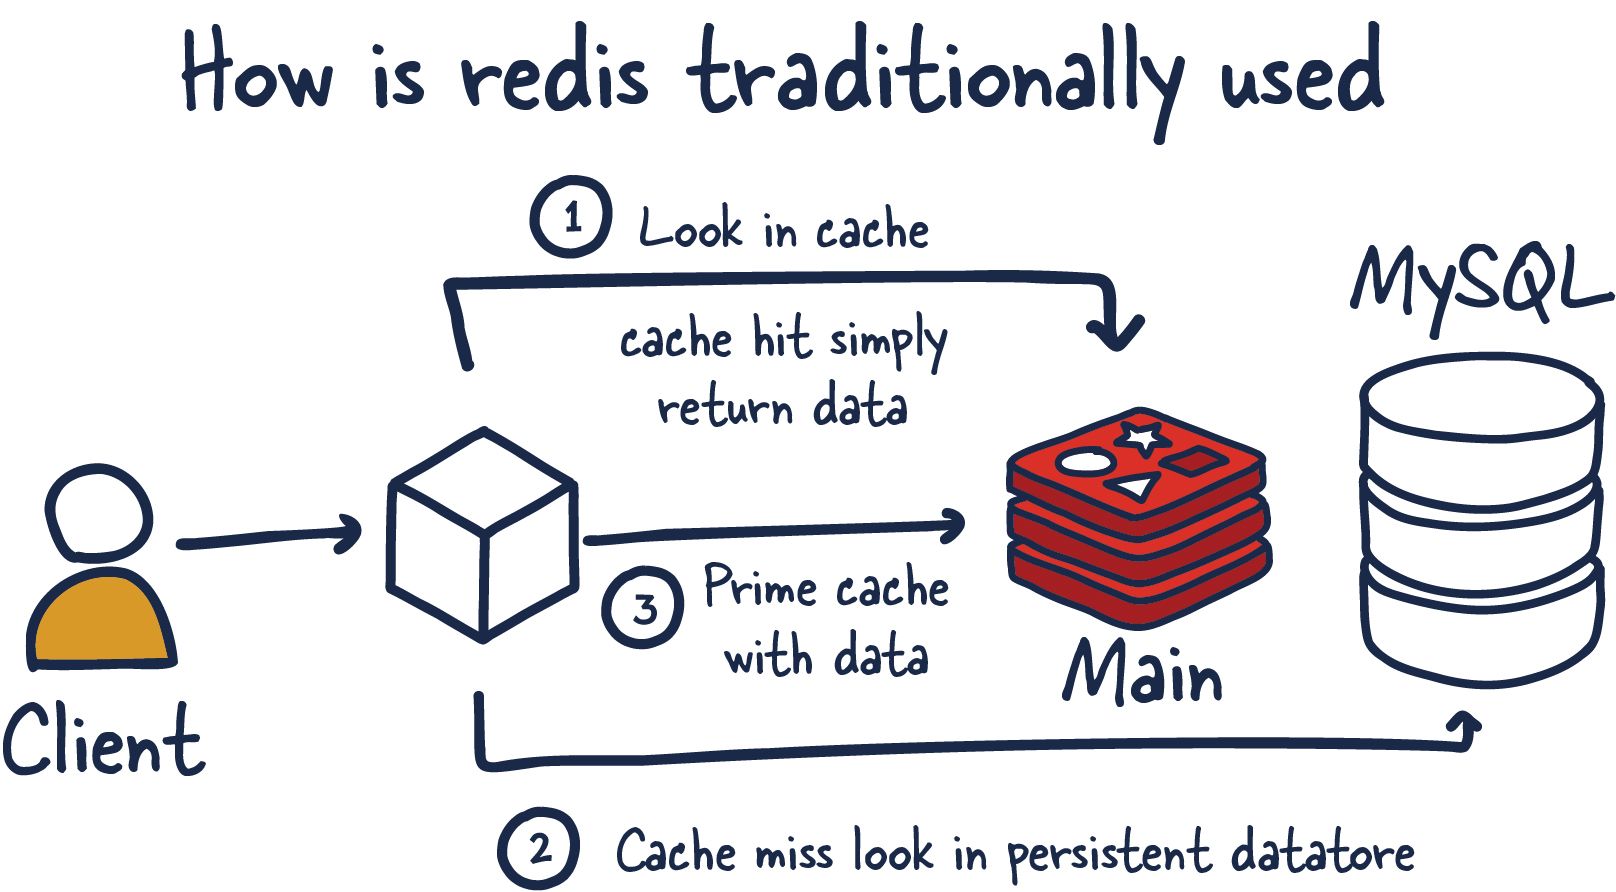 How is REDIS traditionally used.